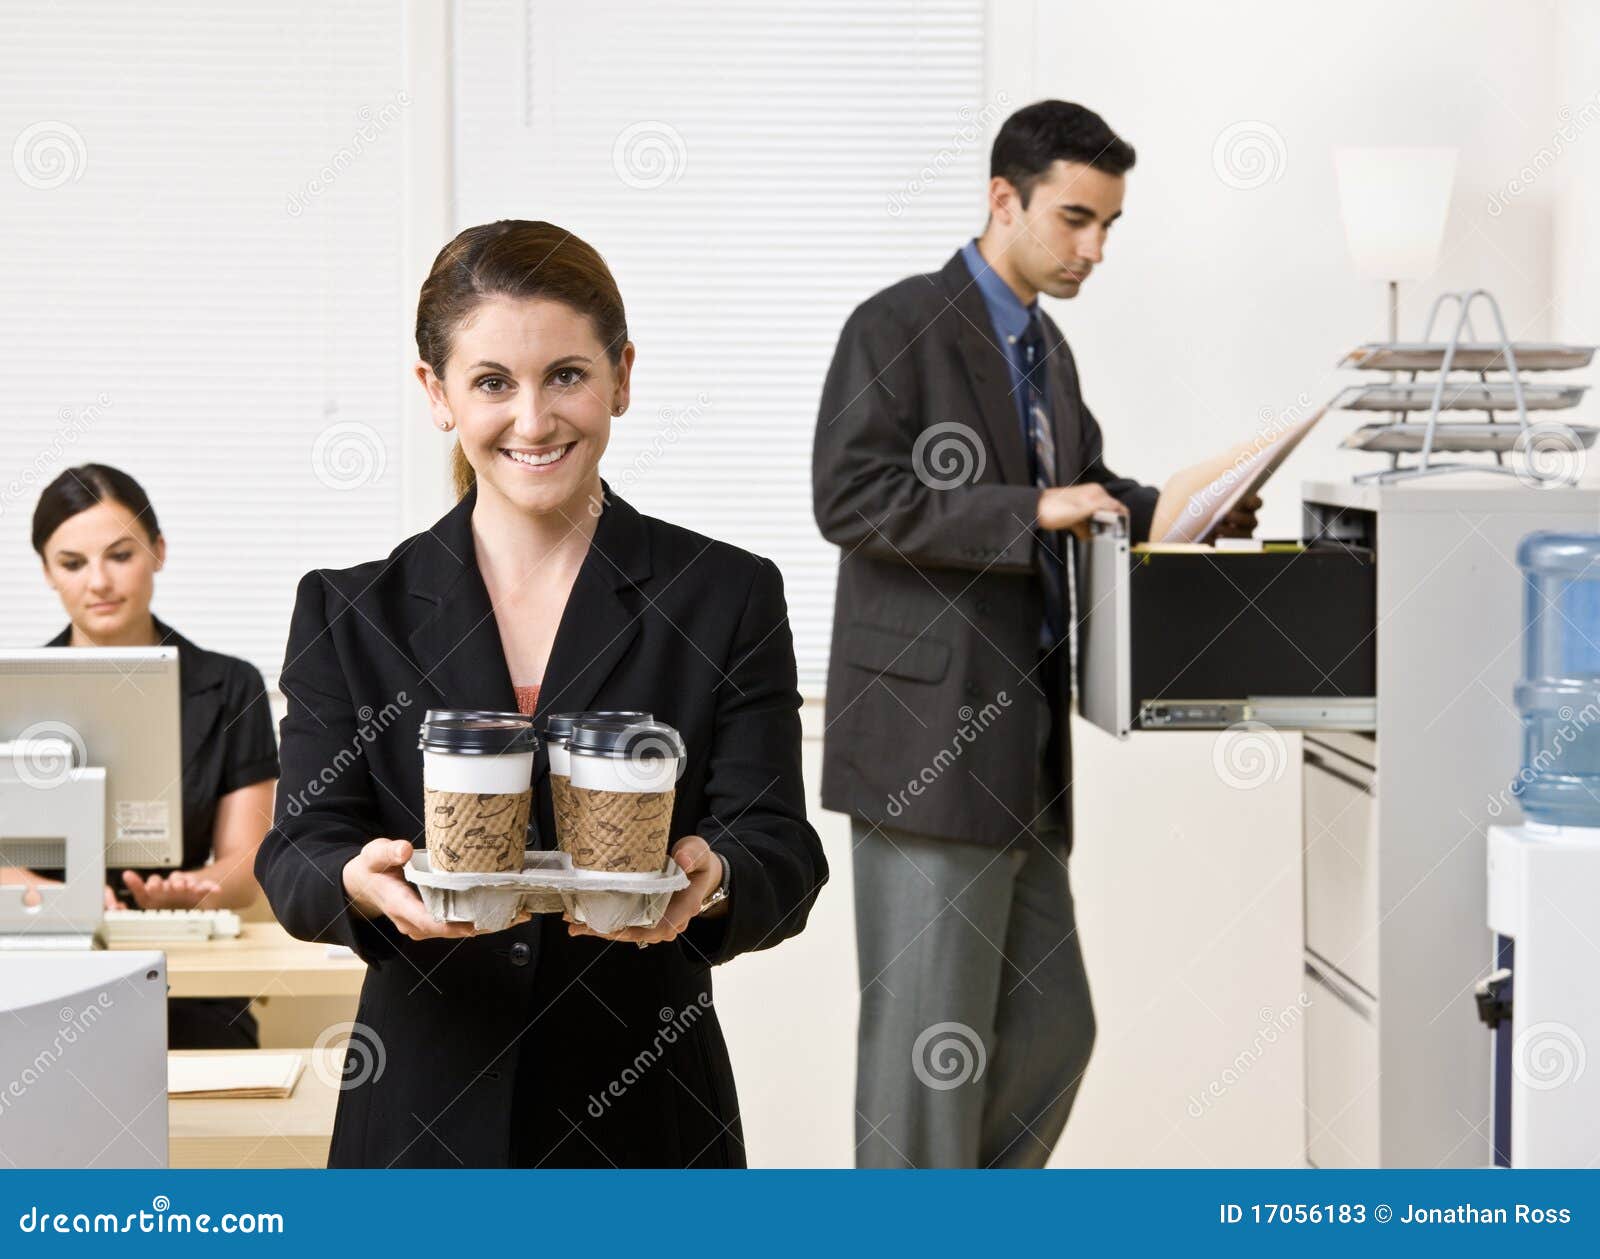 businesswoman carrying tray of coffee